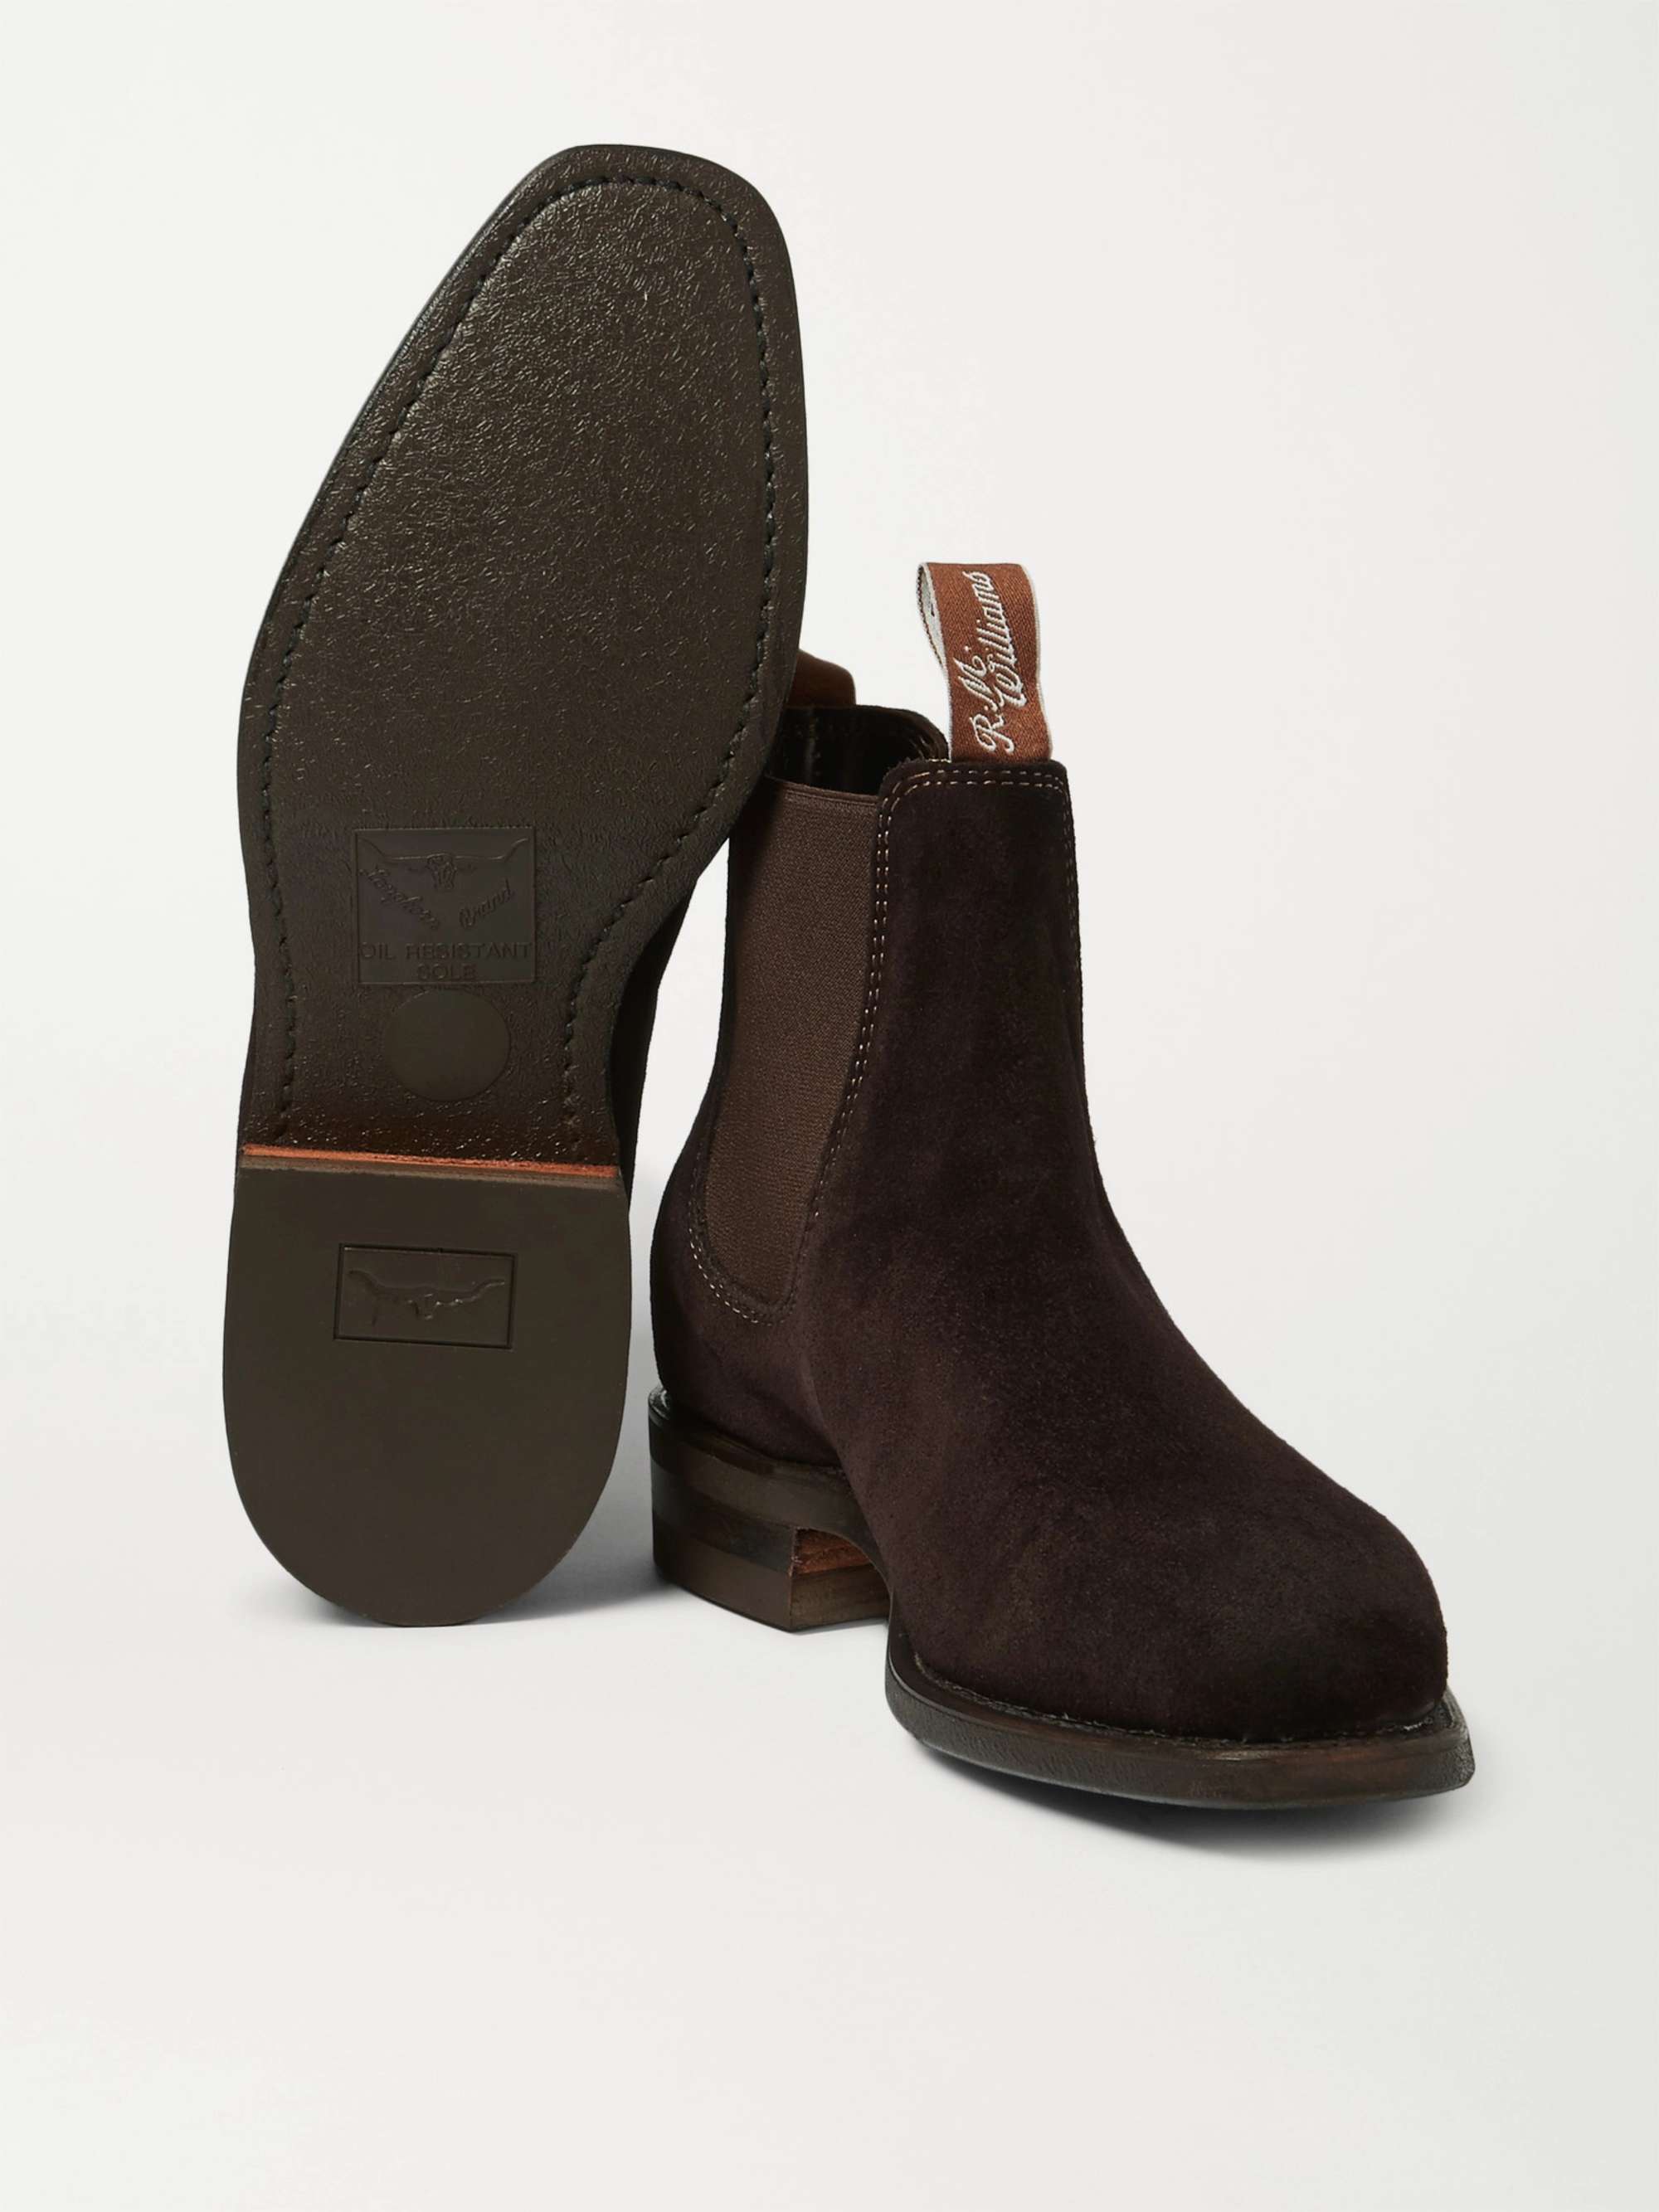 angre masse Bowling R.M.WILLIAMS Comfort Craftsman Suede Chelsea Boots | MR PORTER